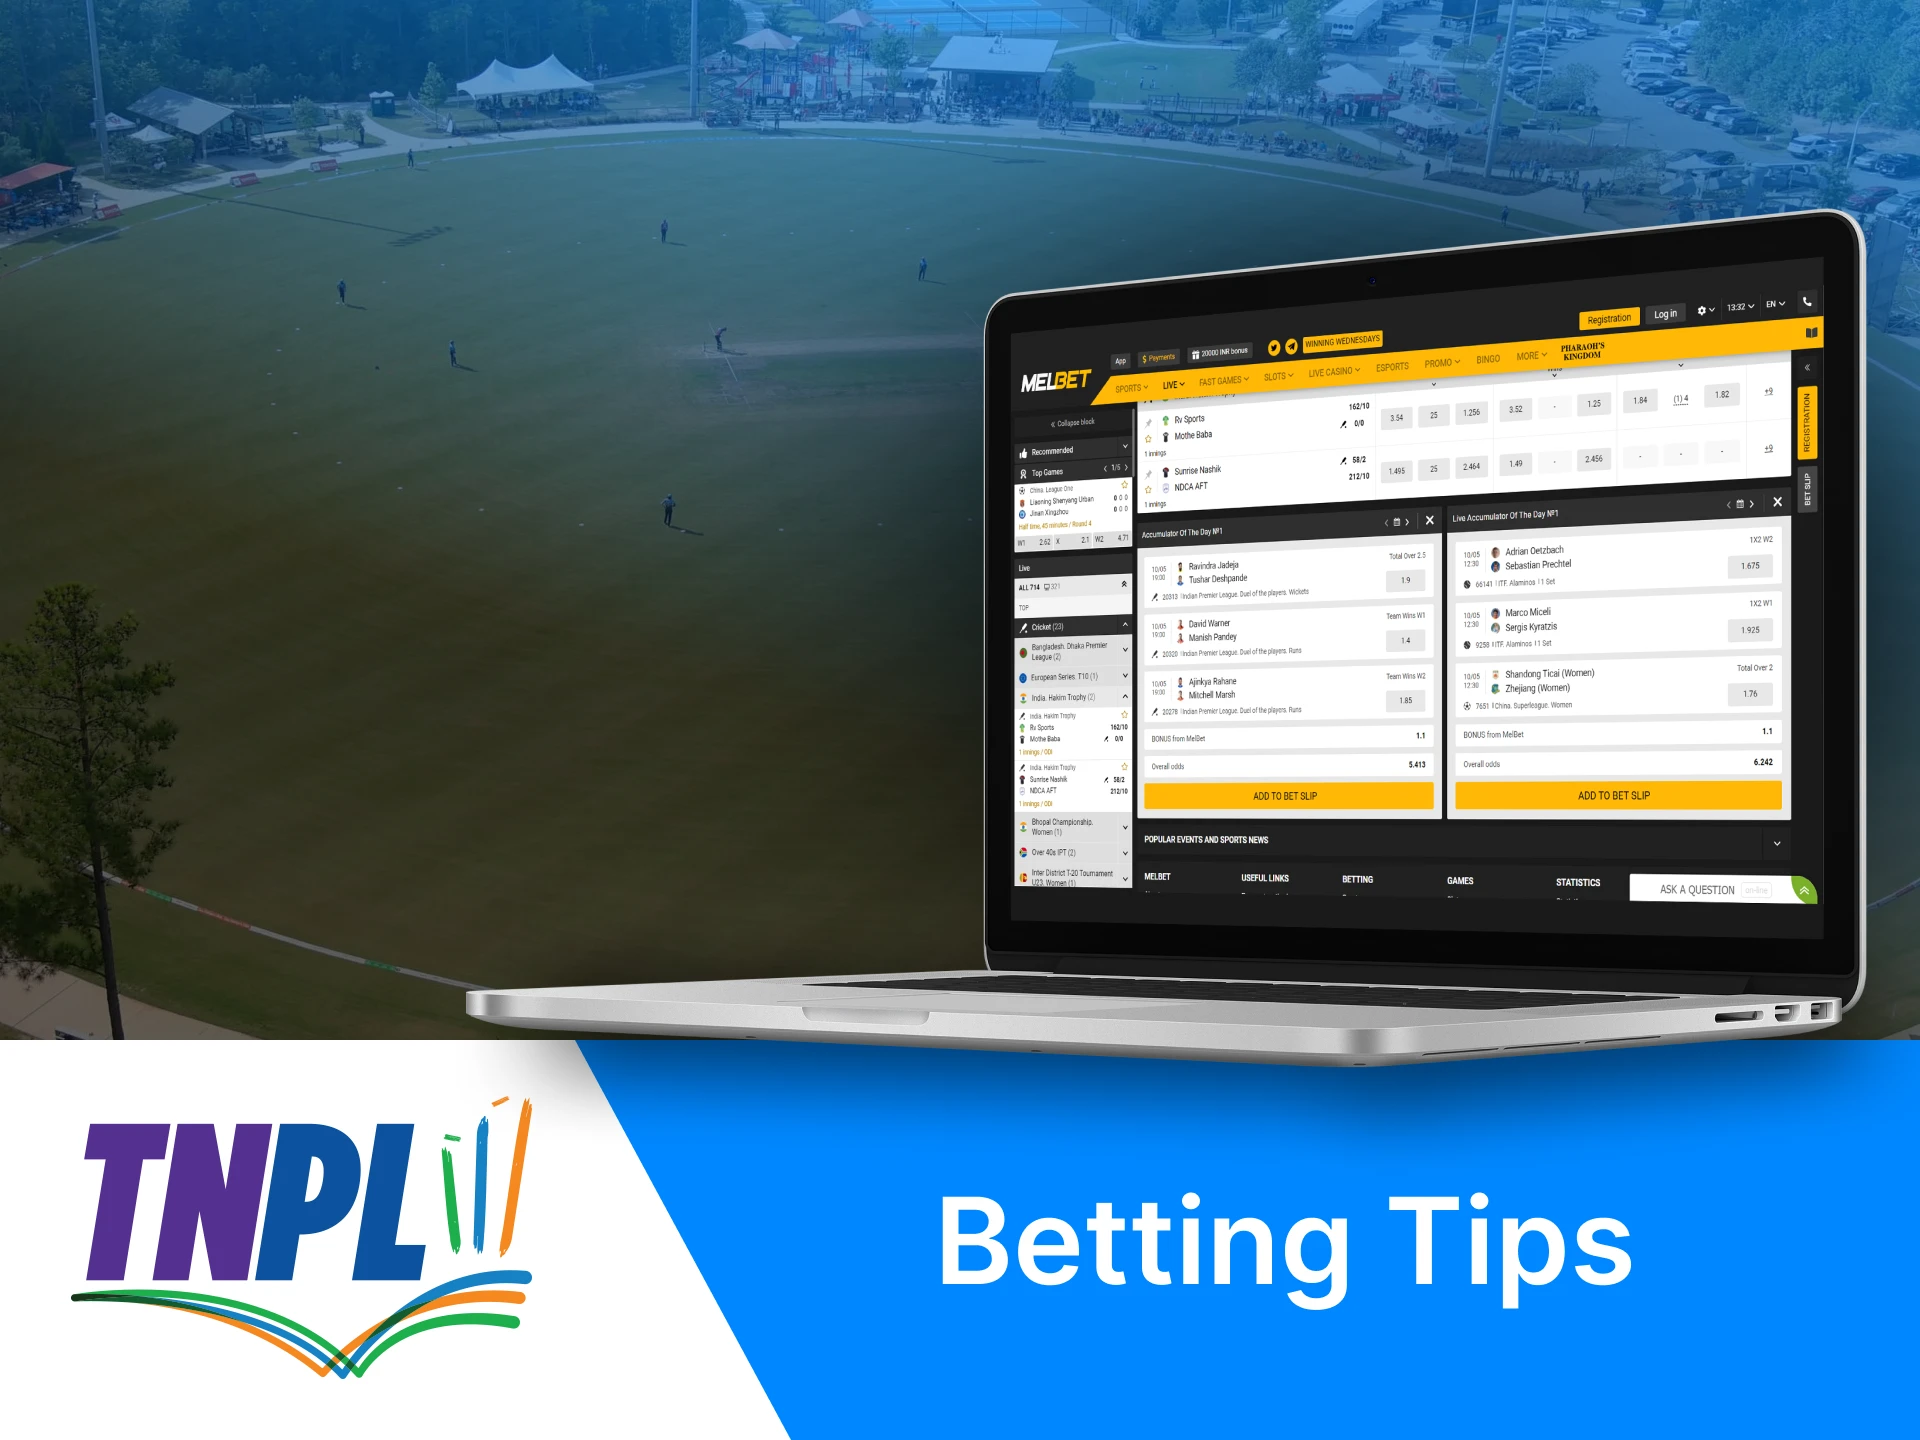 Follow or tips to get all the opportunities to make a profitable prediction on TNPL matches.